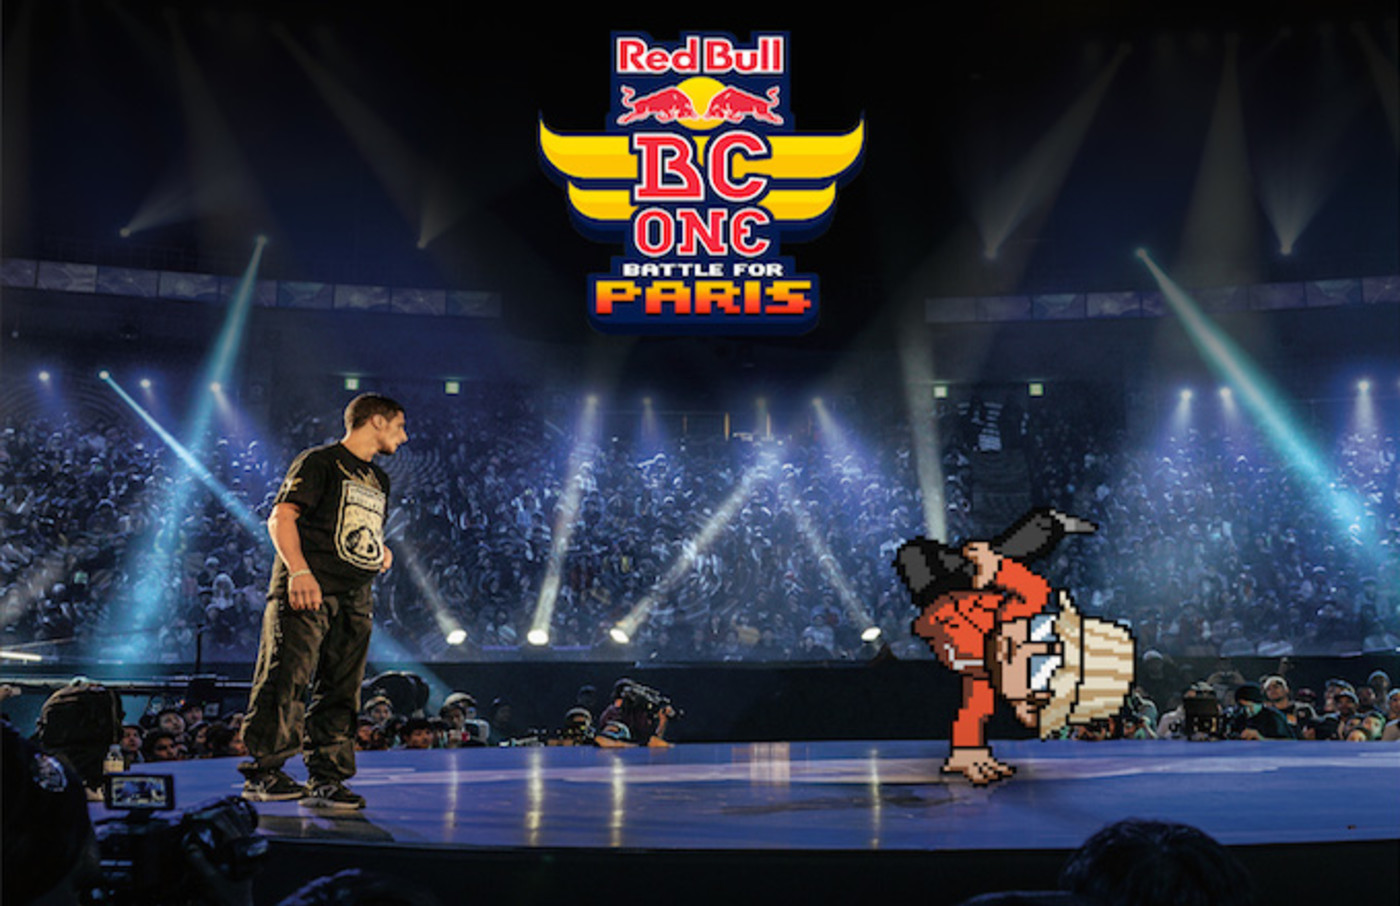 Red Bull Announces Their FirstEver Interactive BBoying Game, "BC One